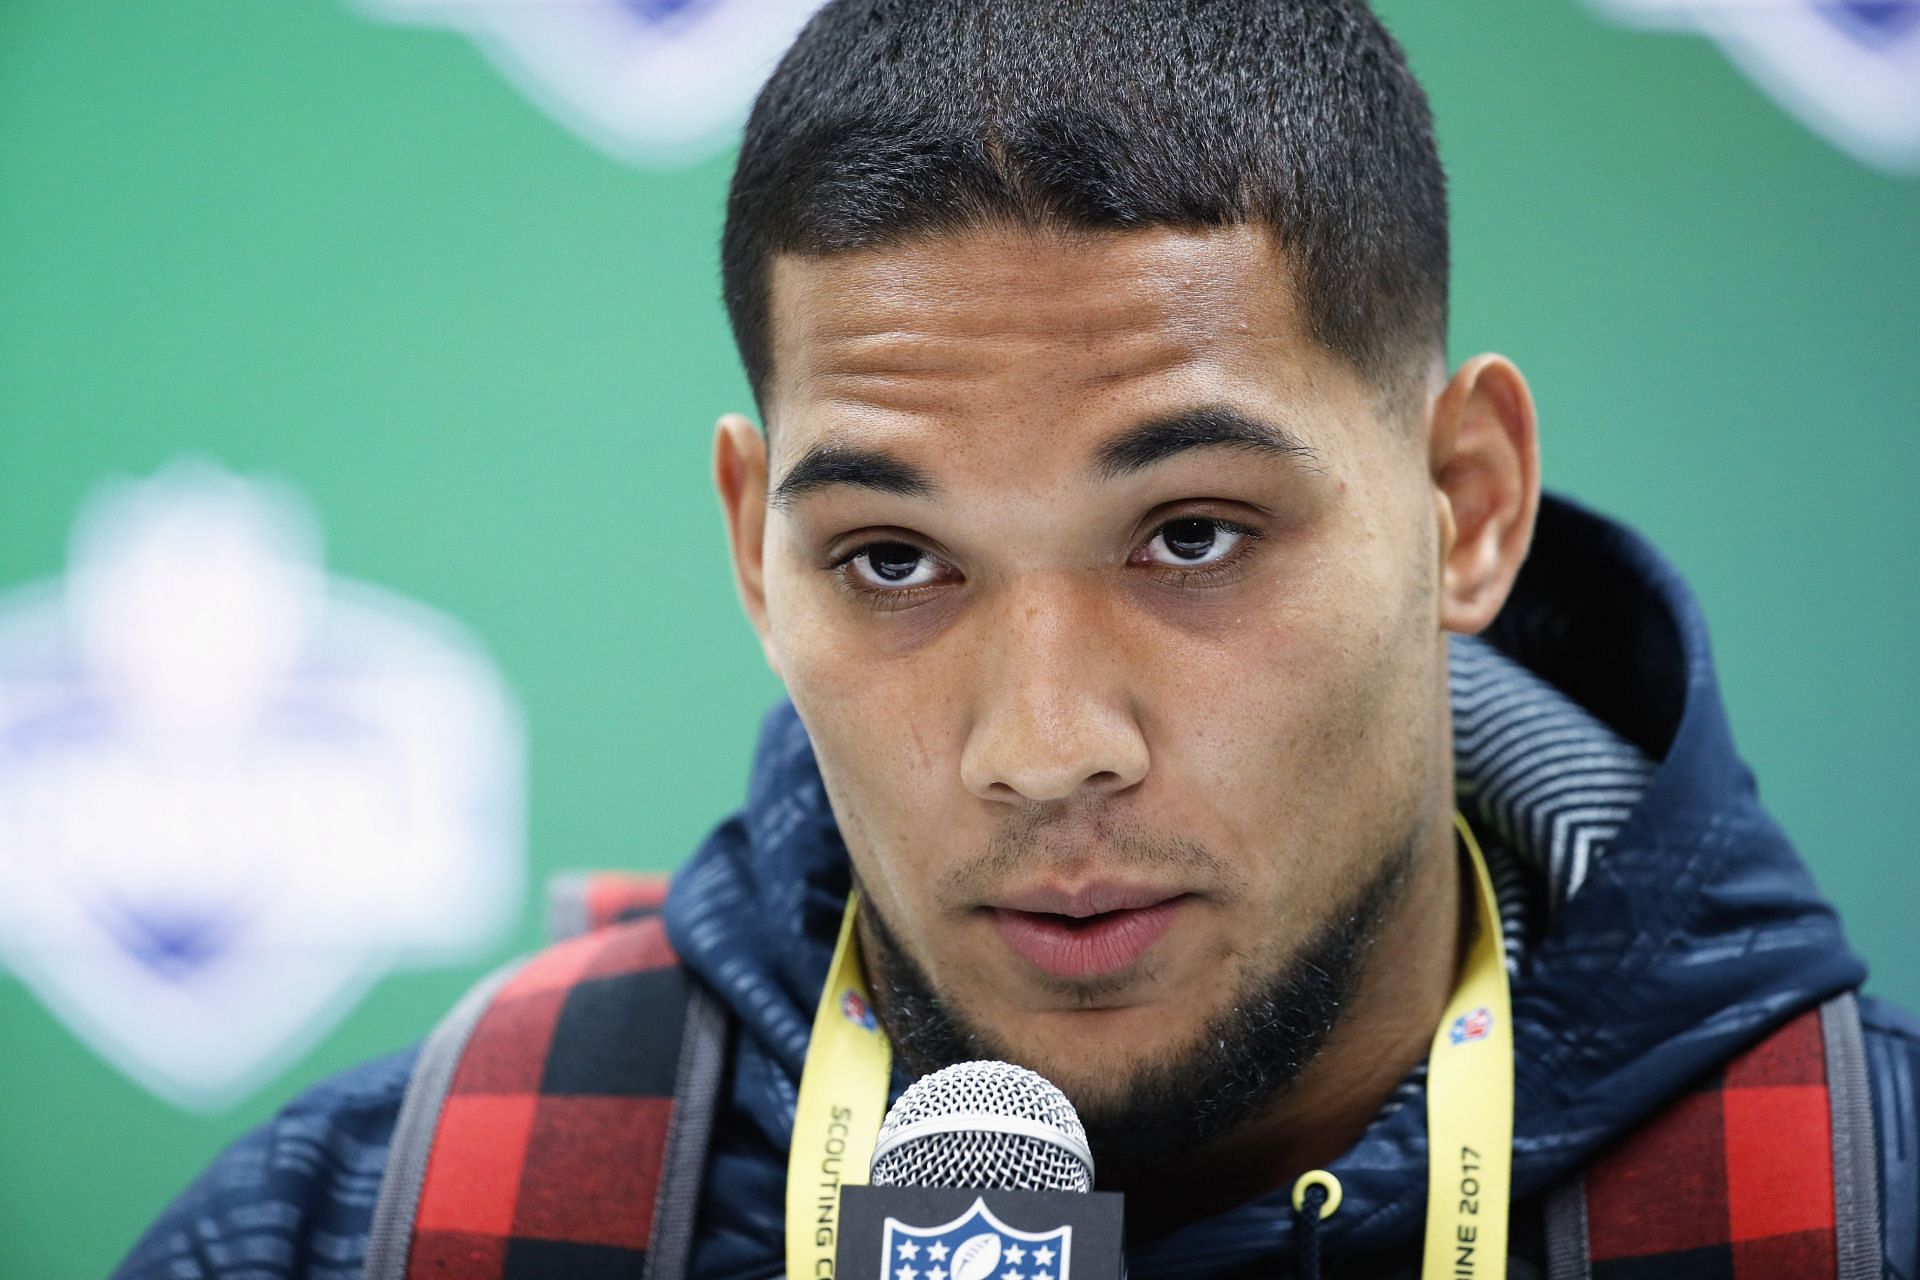 James Conner at the 2017 NFL Combine